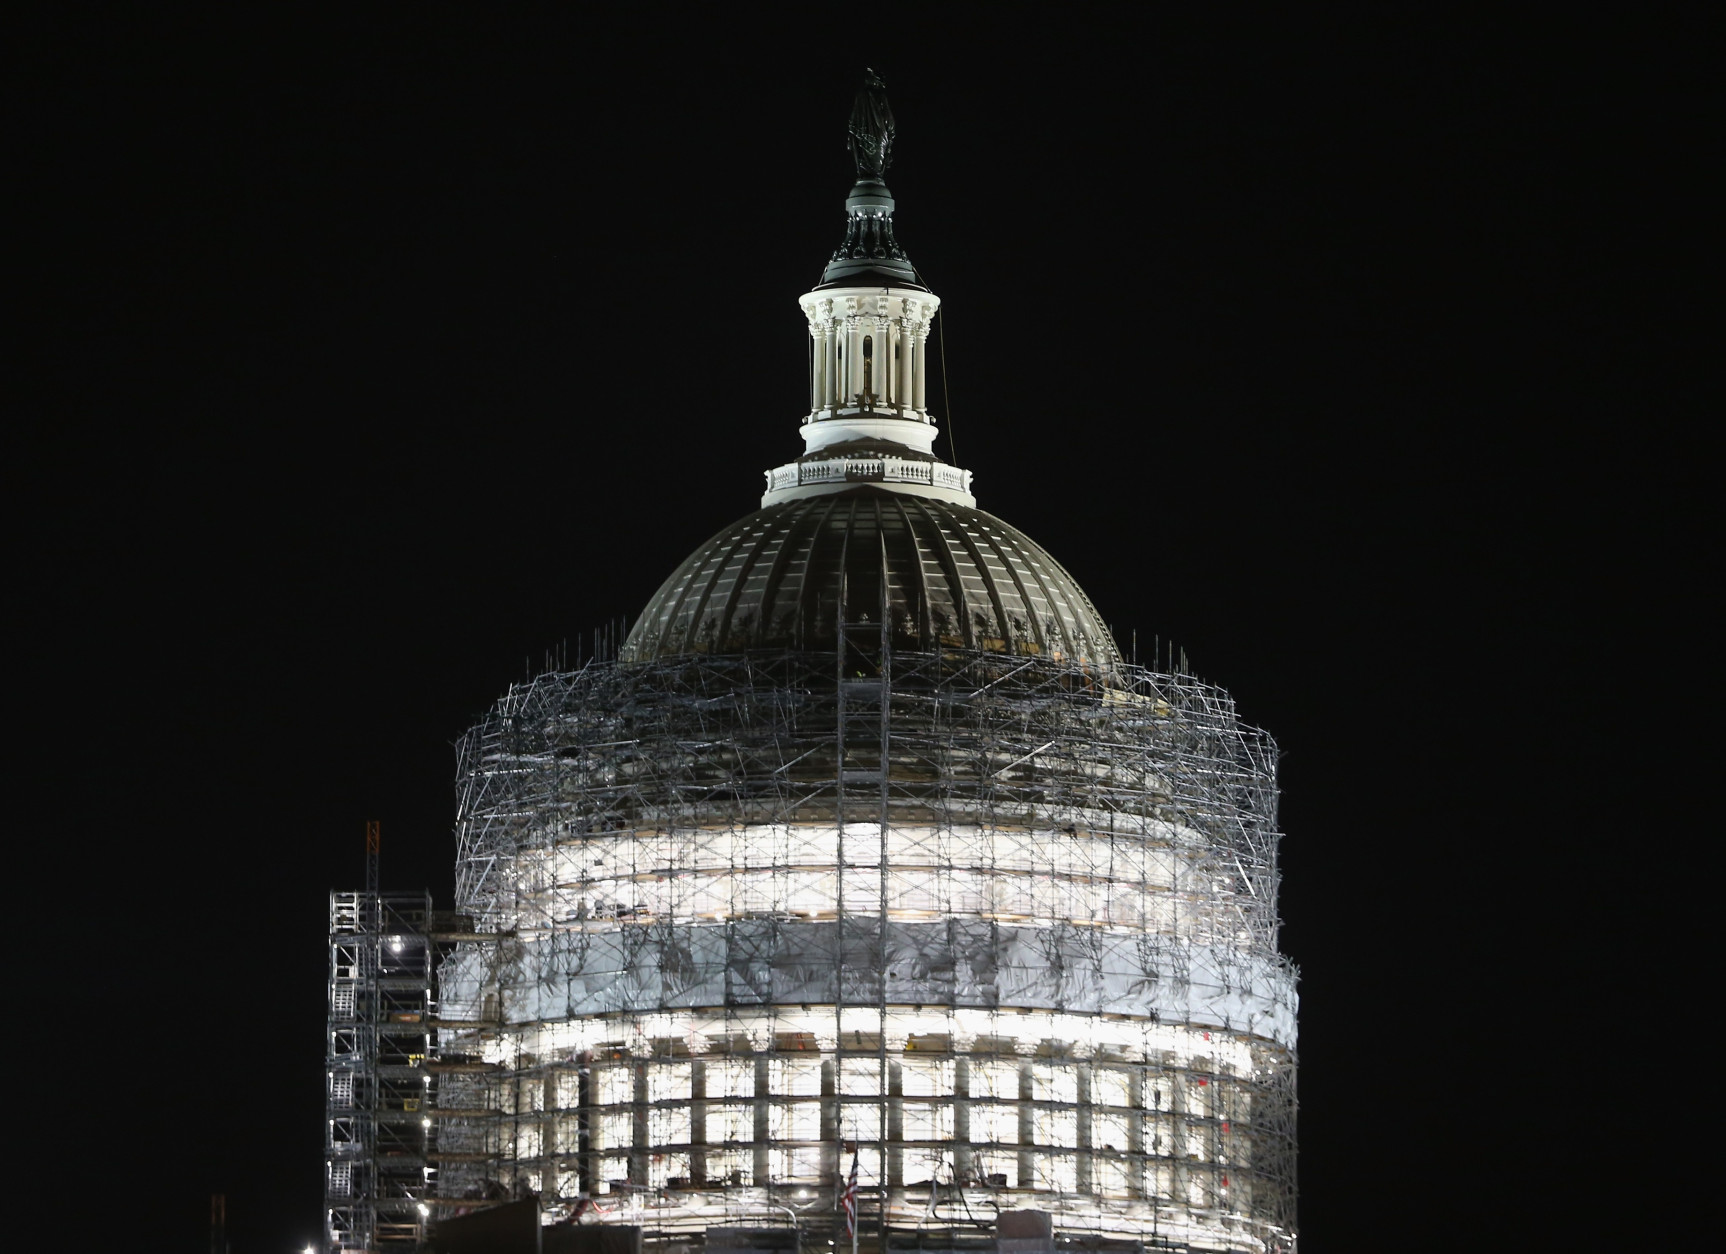 Workers have started to remove the scaffolding that surrounds the dome of the US Capitol that is undergoing restoration, on March 22, 2016 in Washington, DC. The restoration of the cast iron dome is expected to take two years and cost as much as 60 million dollars  (Photo by Mark Wilson/Getty Images)